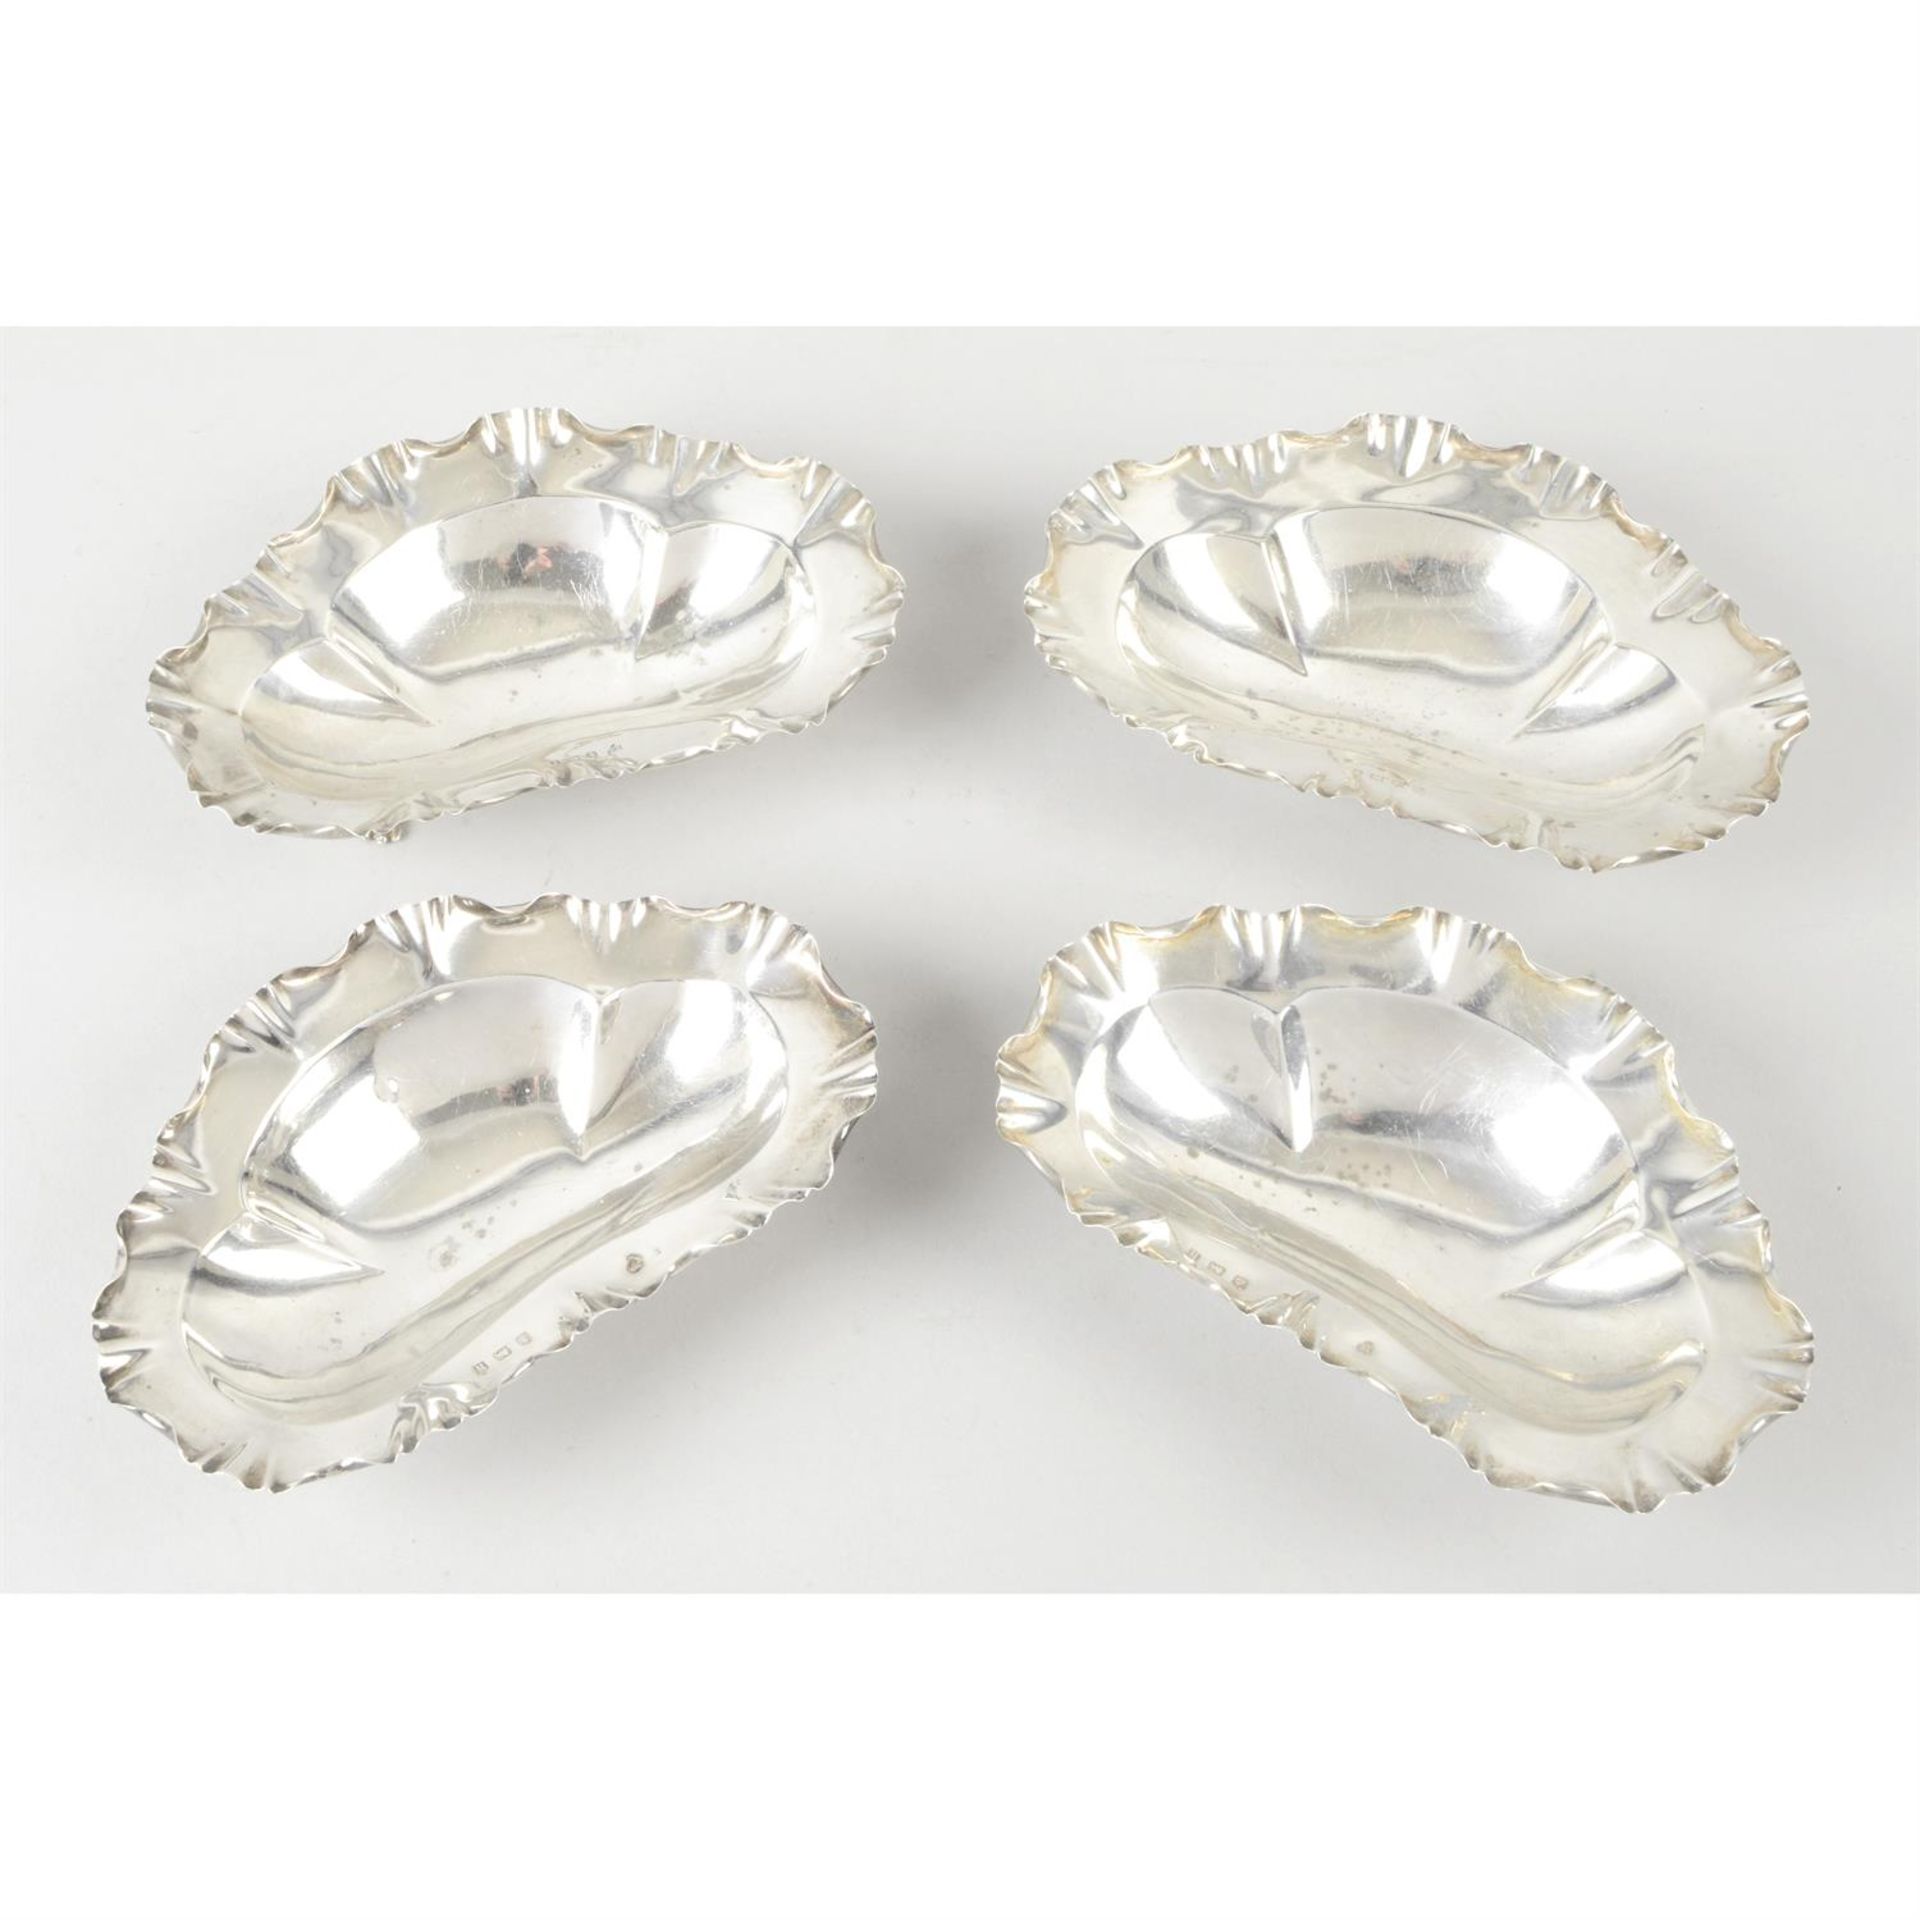 A set of four Edwardian silver dishes.